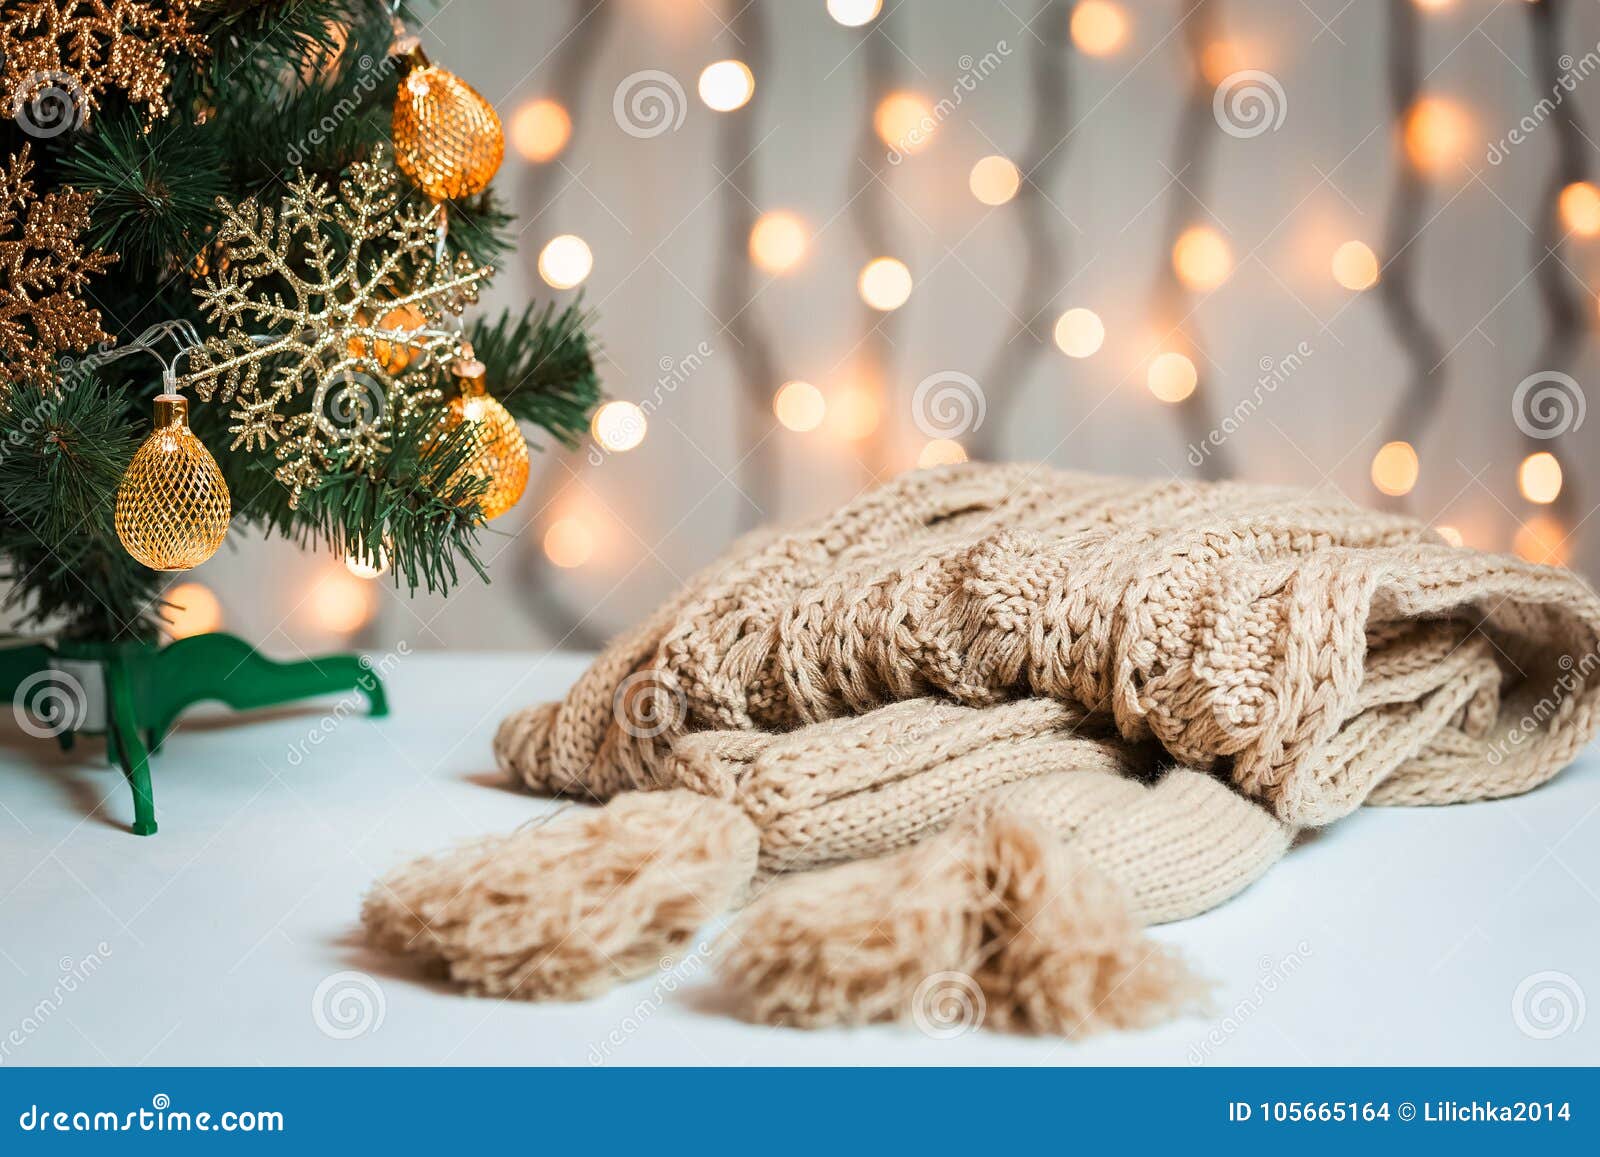 A Christmas Tree on the Background of a Bokeh Stock Photo - Image of ...